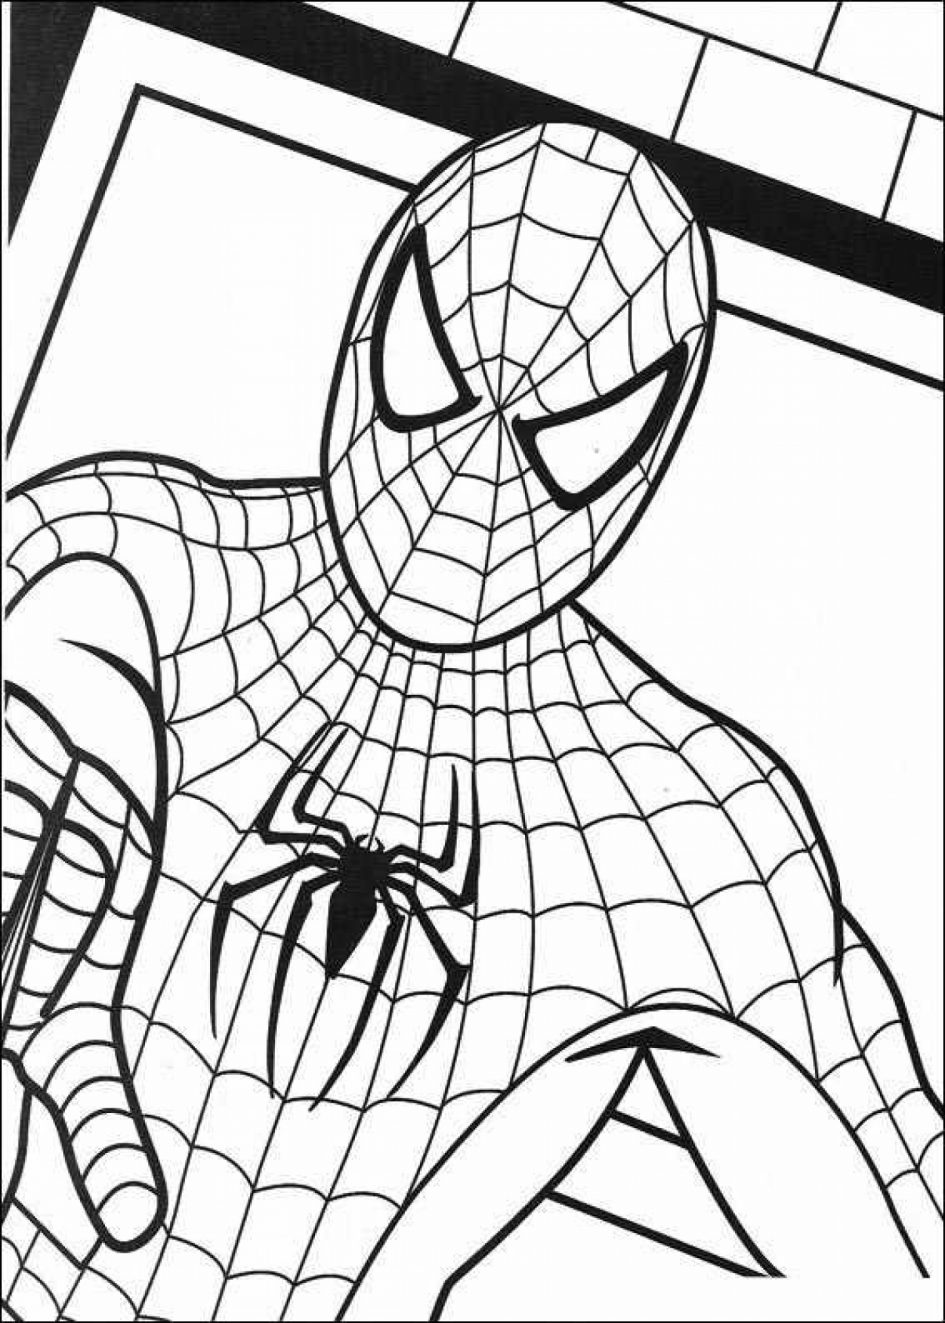 Marvel Coloring Pages | Free download on ClipArtMag